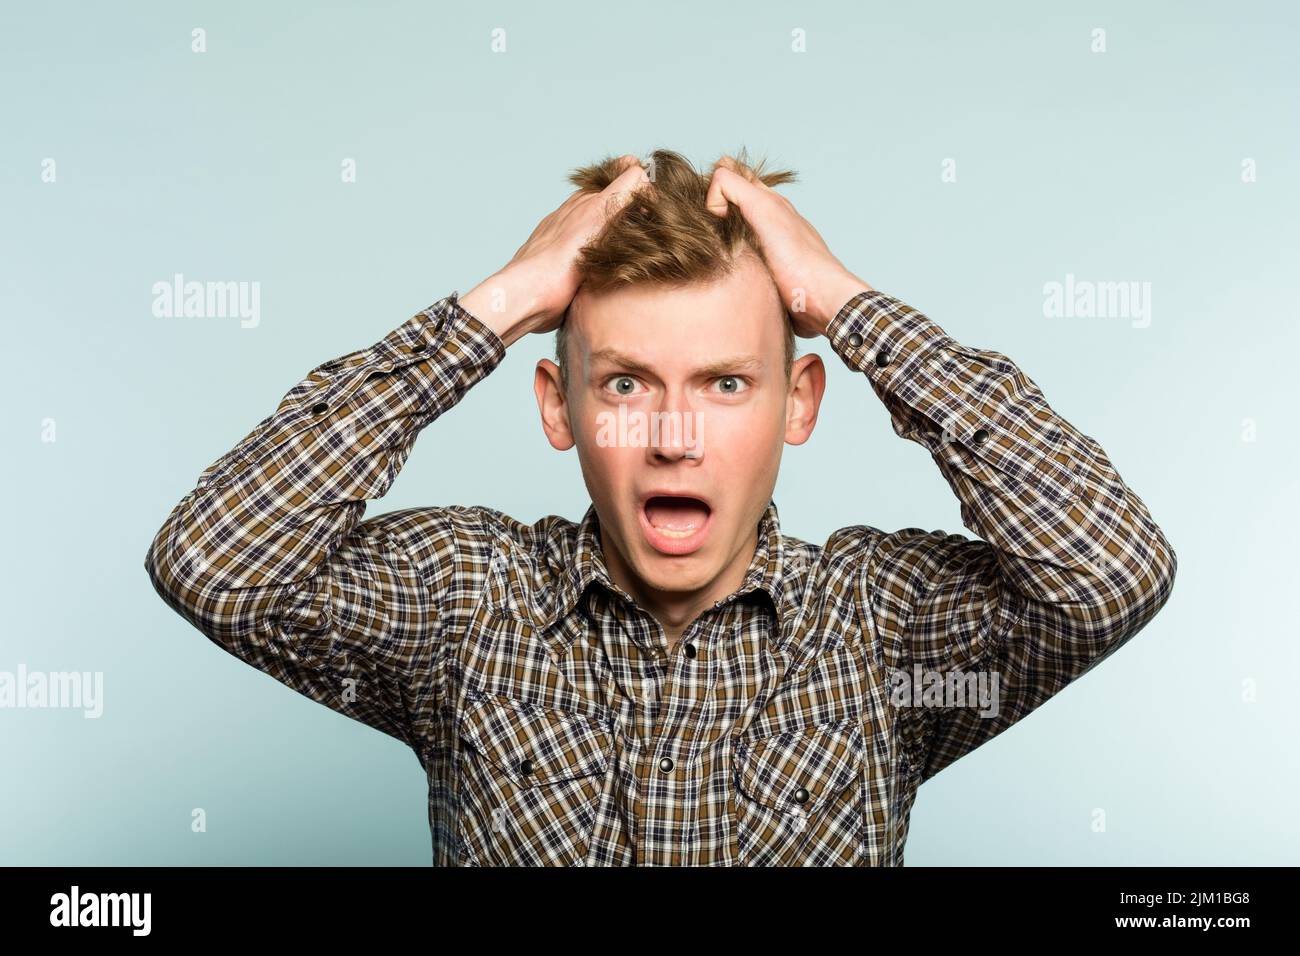 shocked worried distraught man pull hair emotion Stock Photo